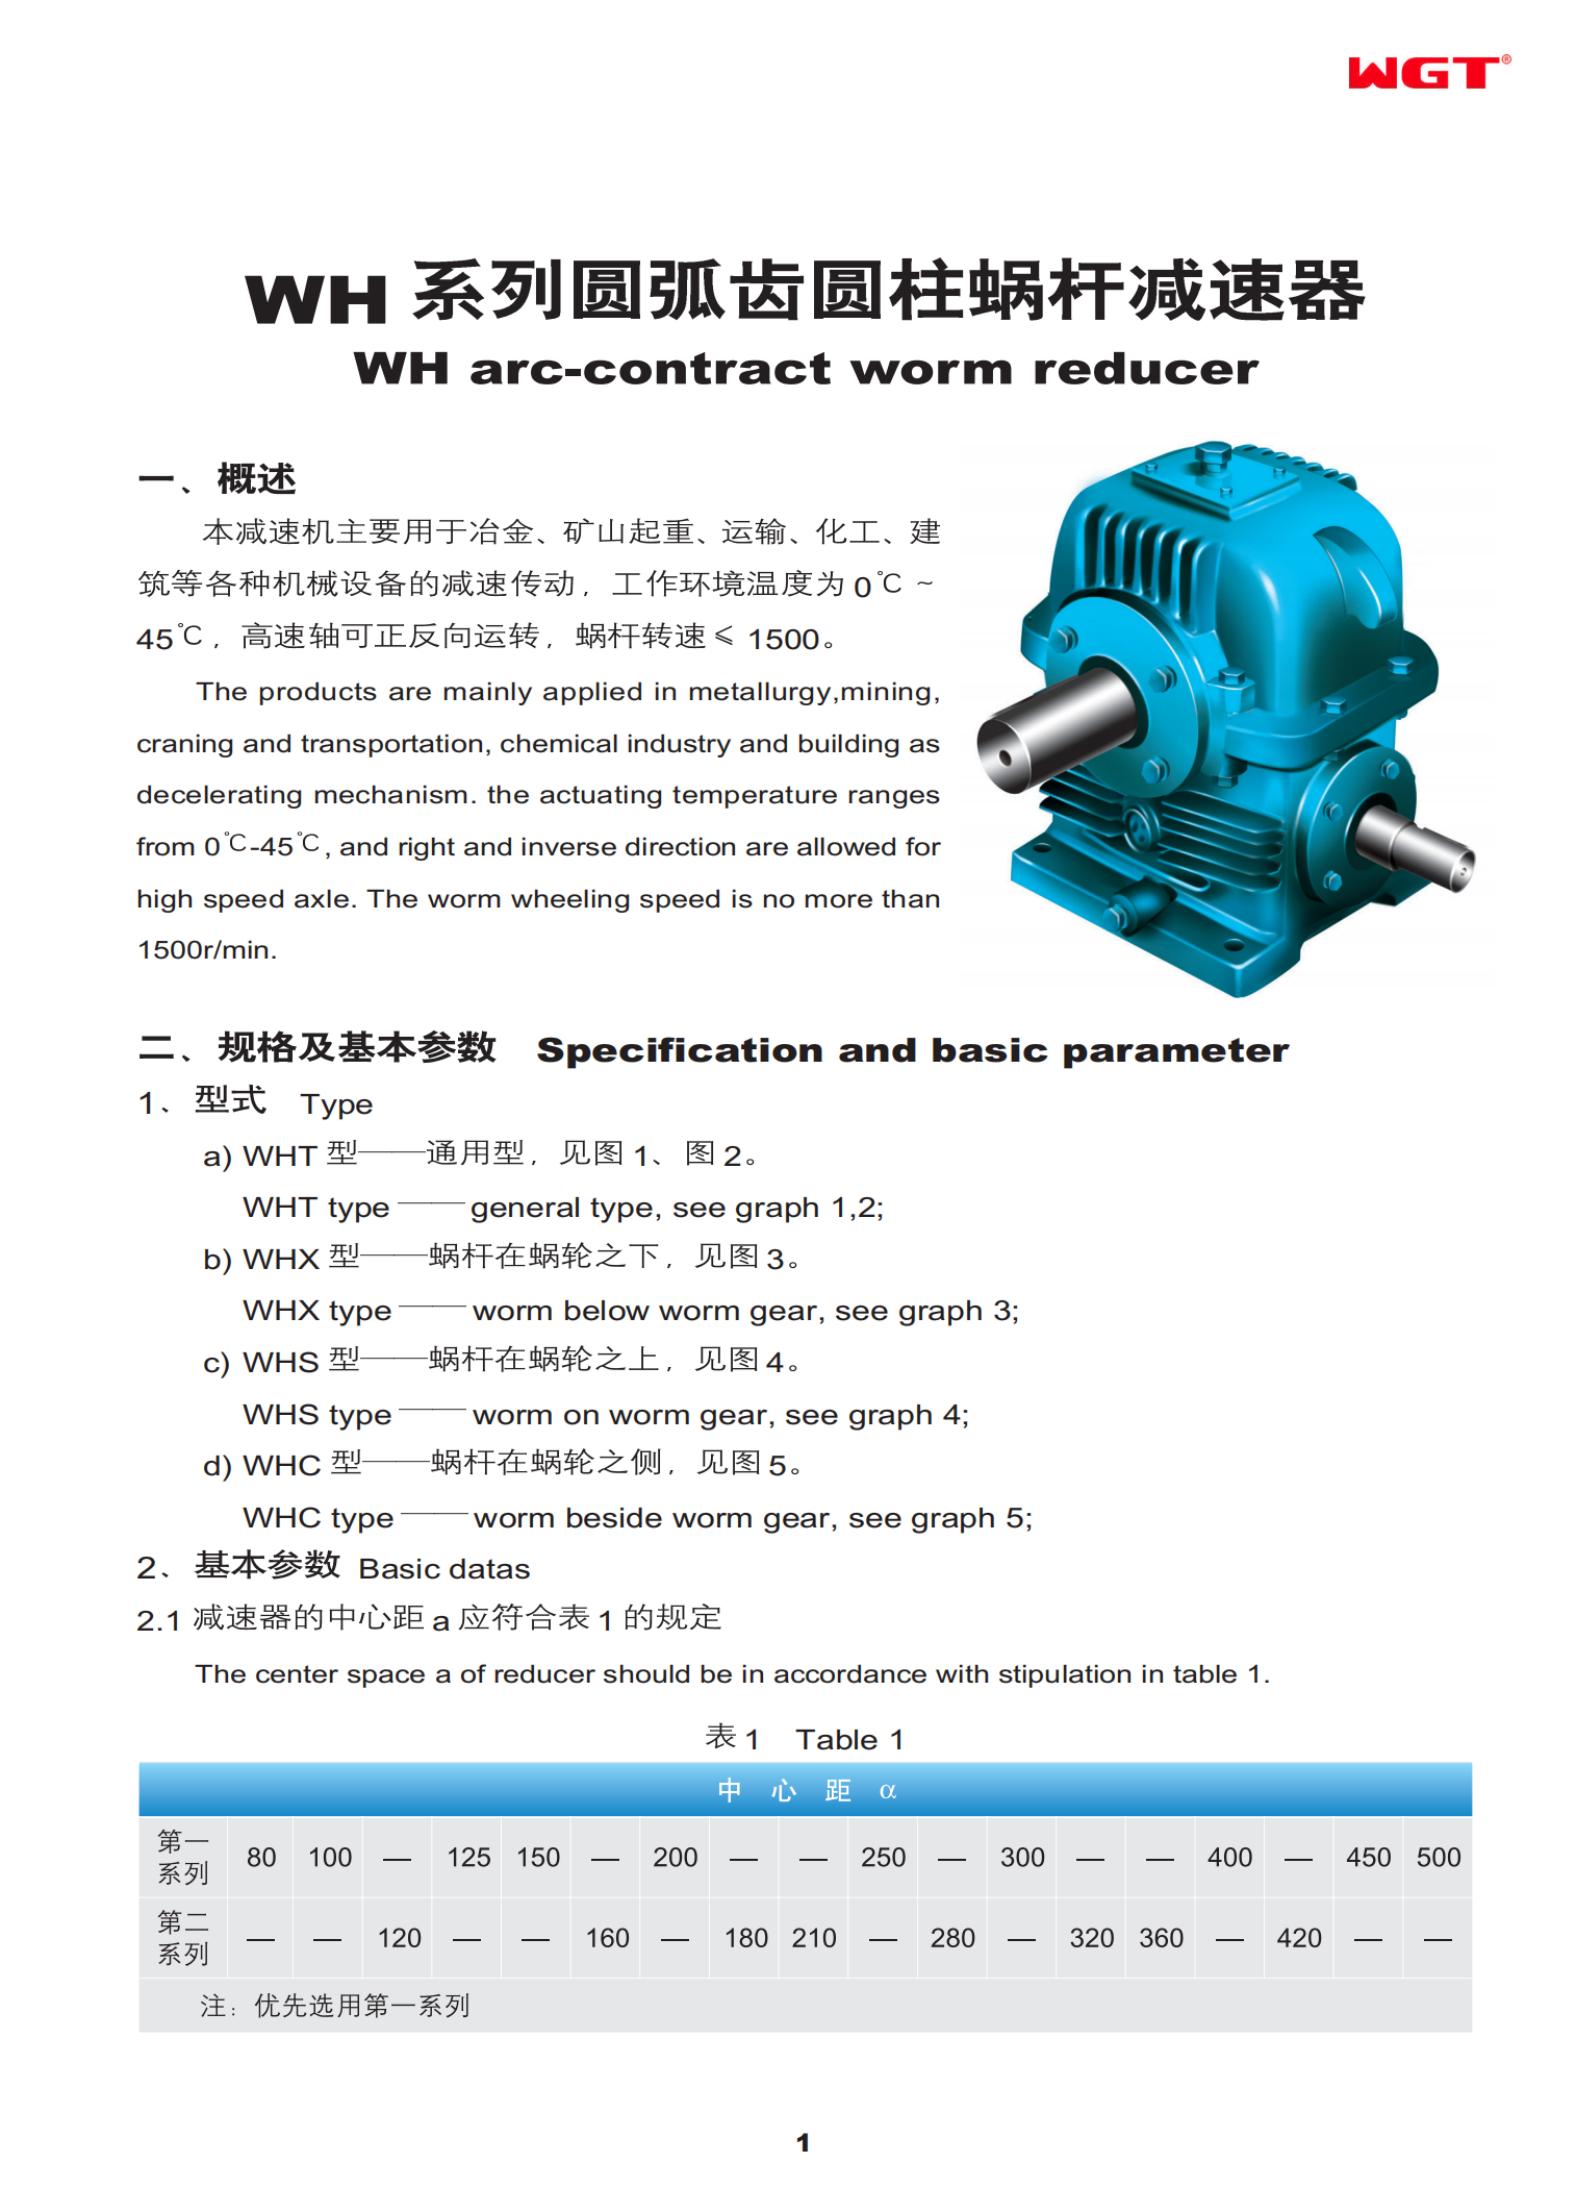 WHT08 WHarc-contract worm reducer